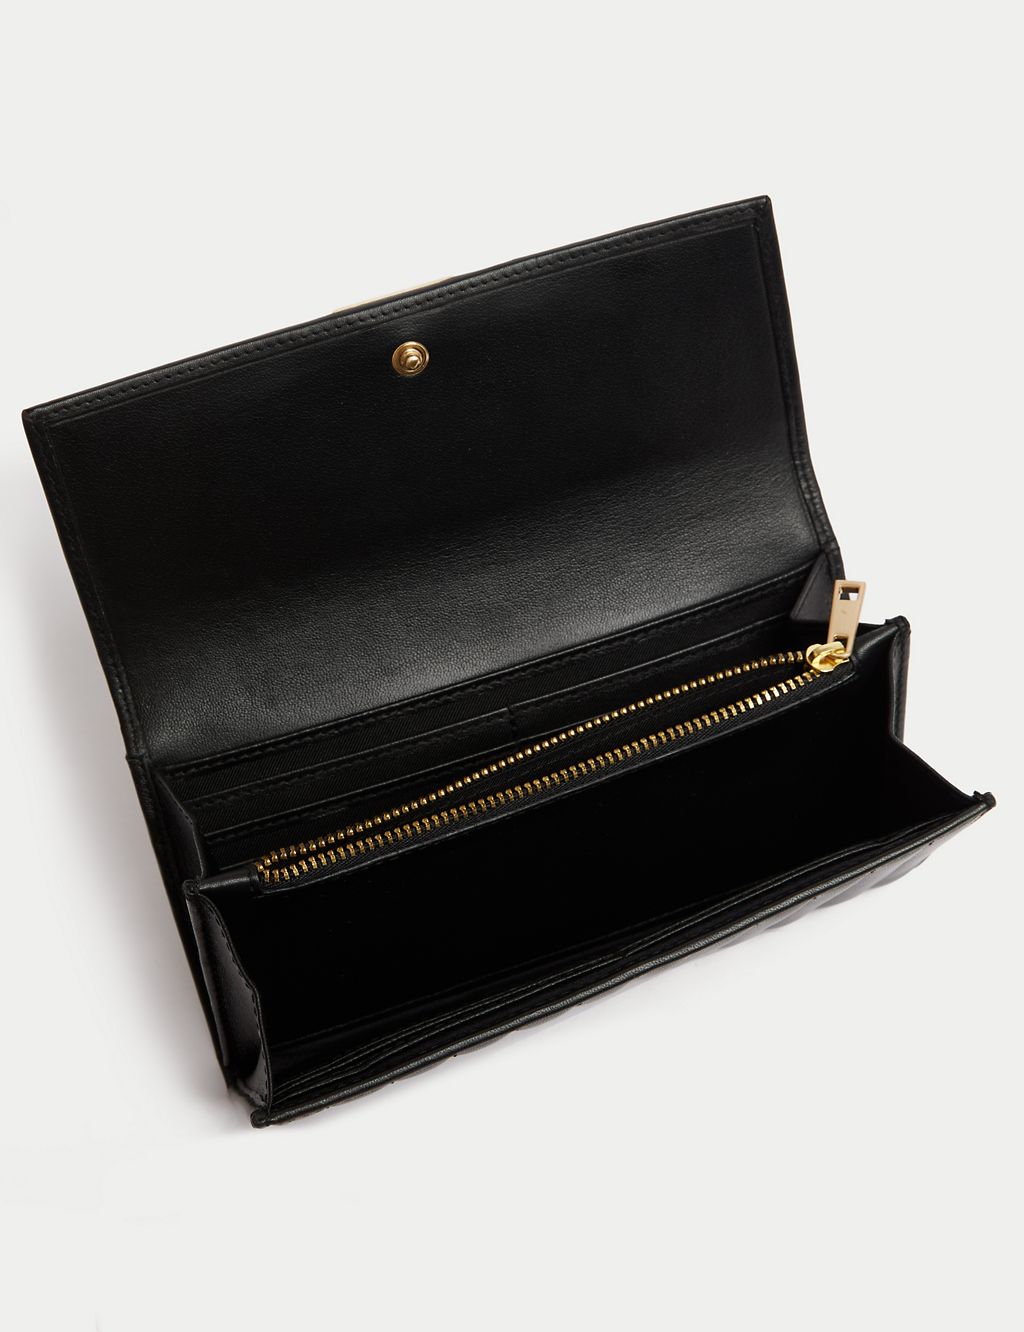 Leather Metallic Large Foldover Purse | M&S Collection | M&S